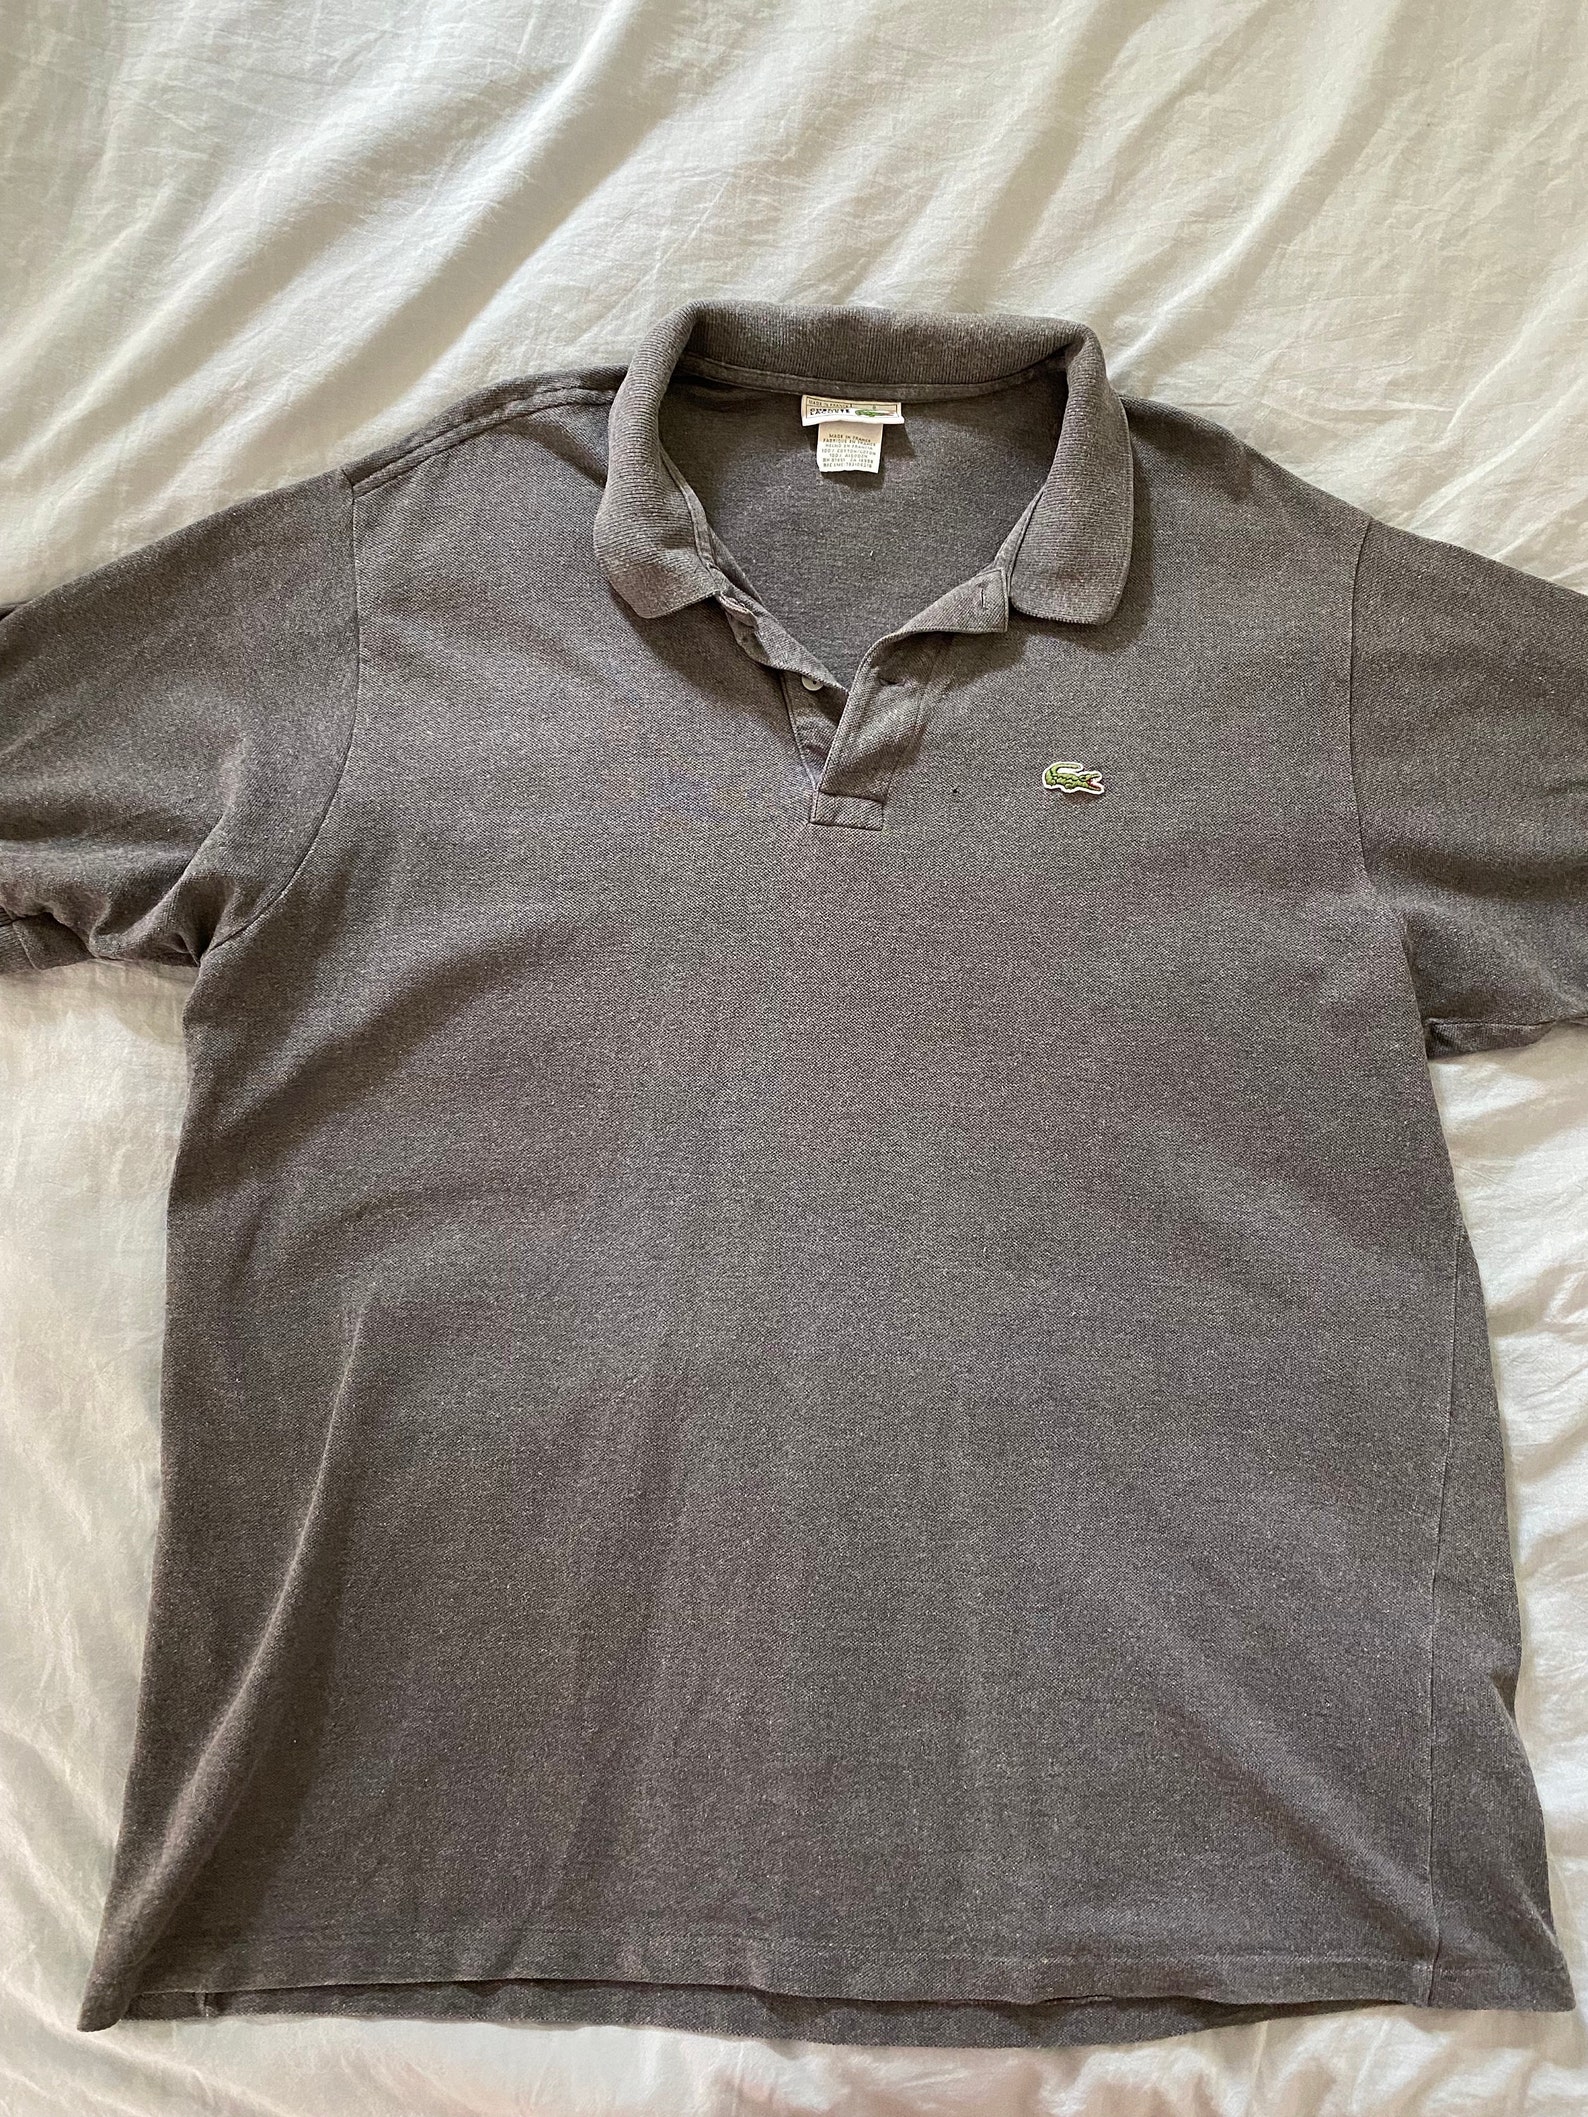 Lacoste polo Size 8 | Etsy